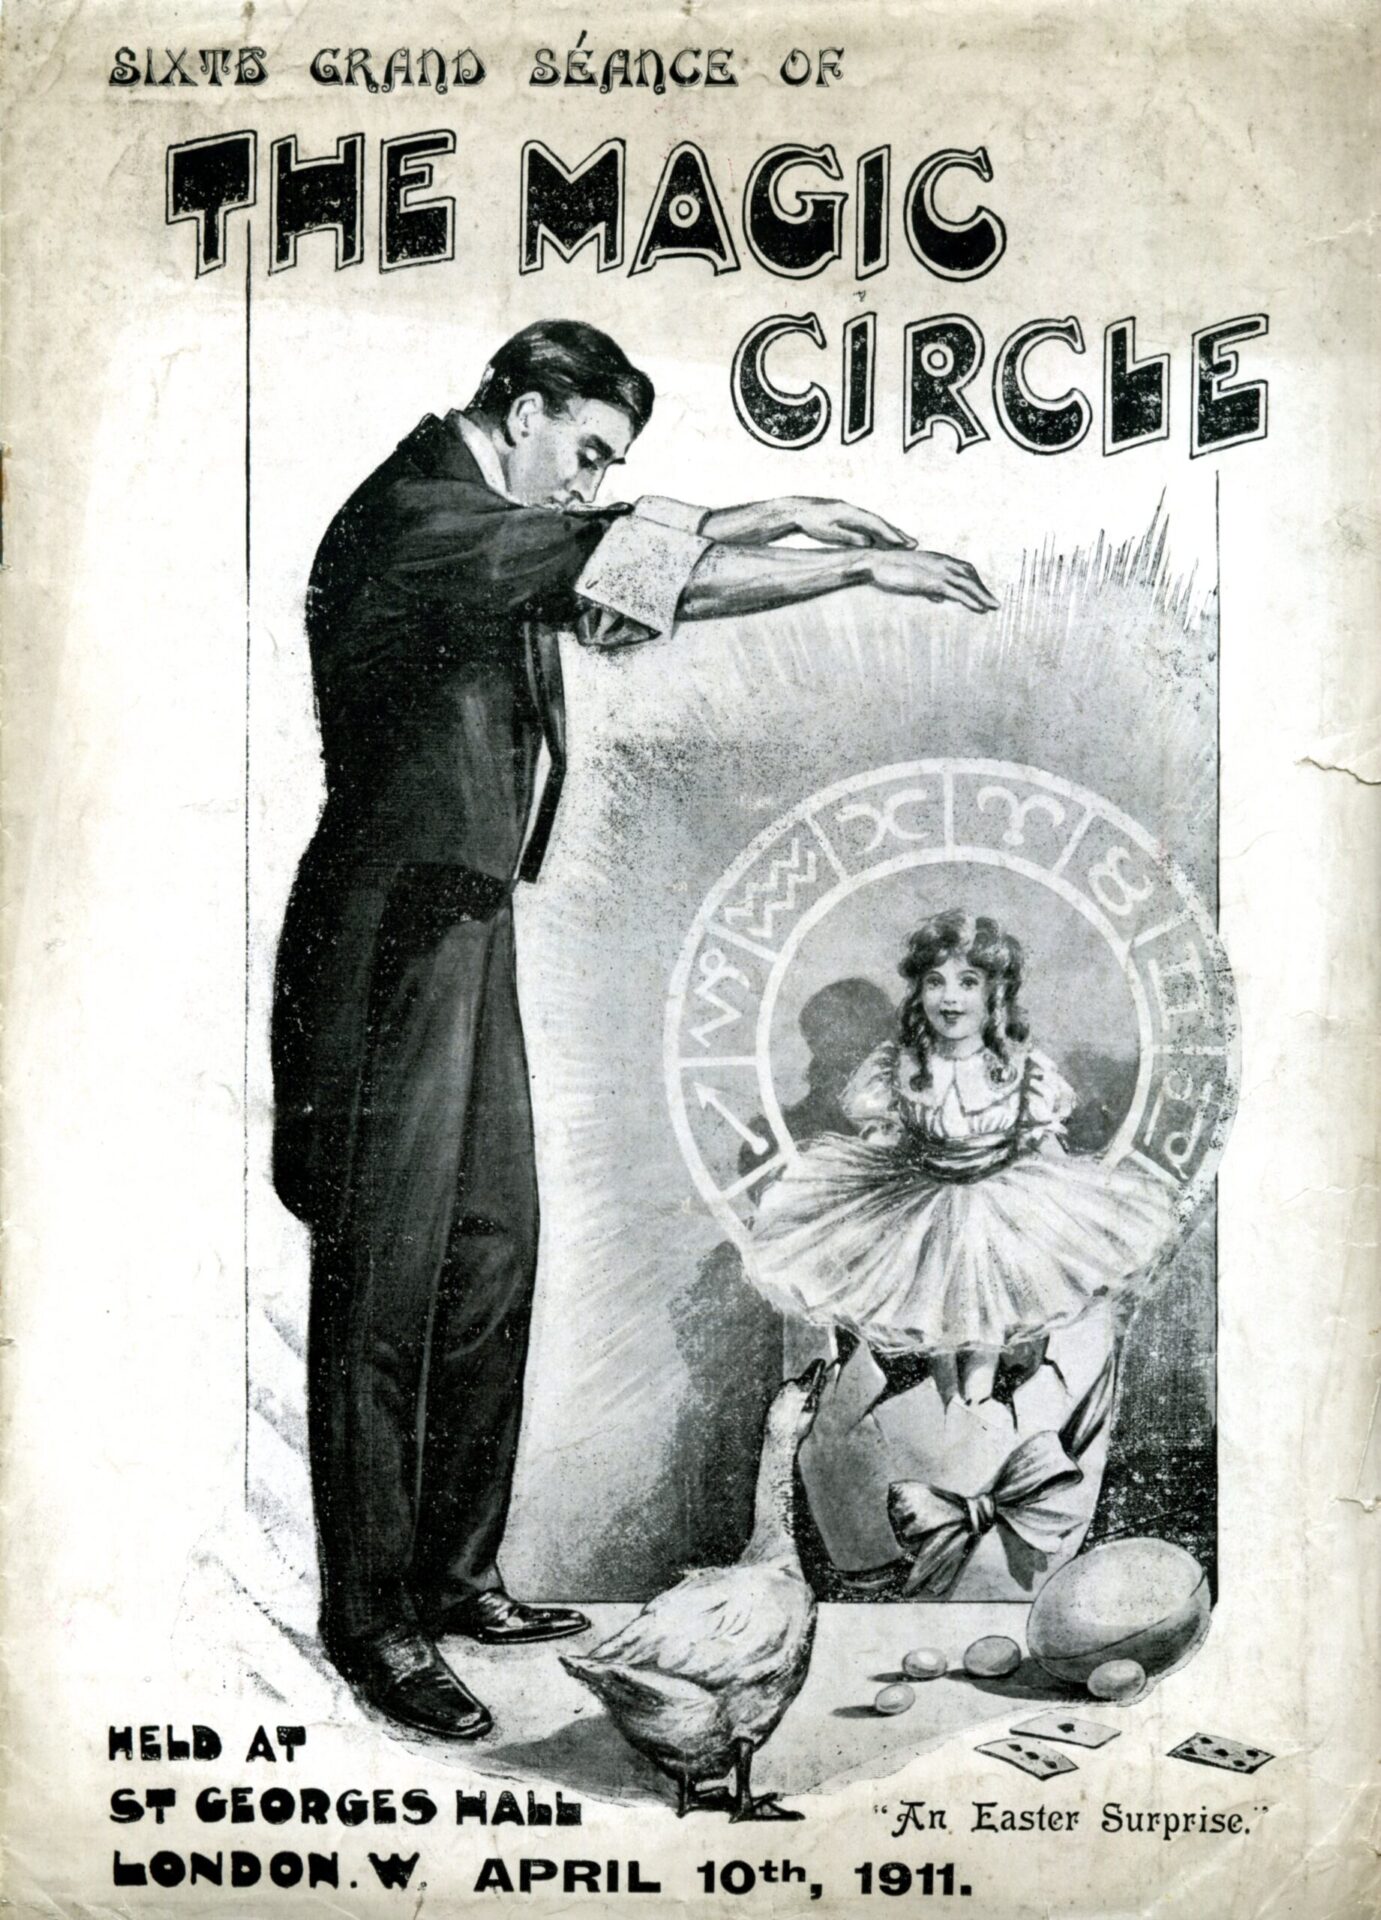 Programme for the Sixth Grand Séance of The Magic Circle, 10 April 1911